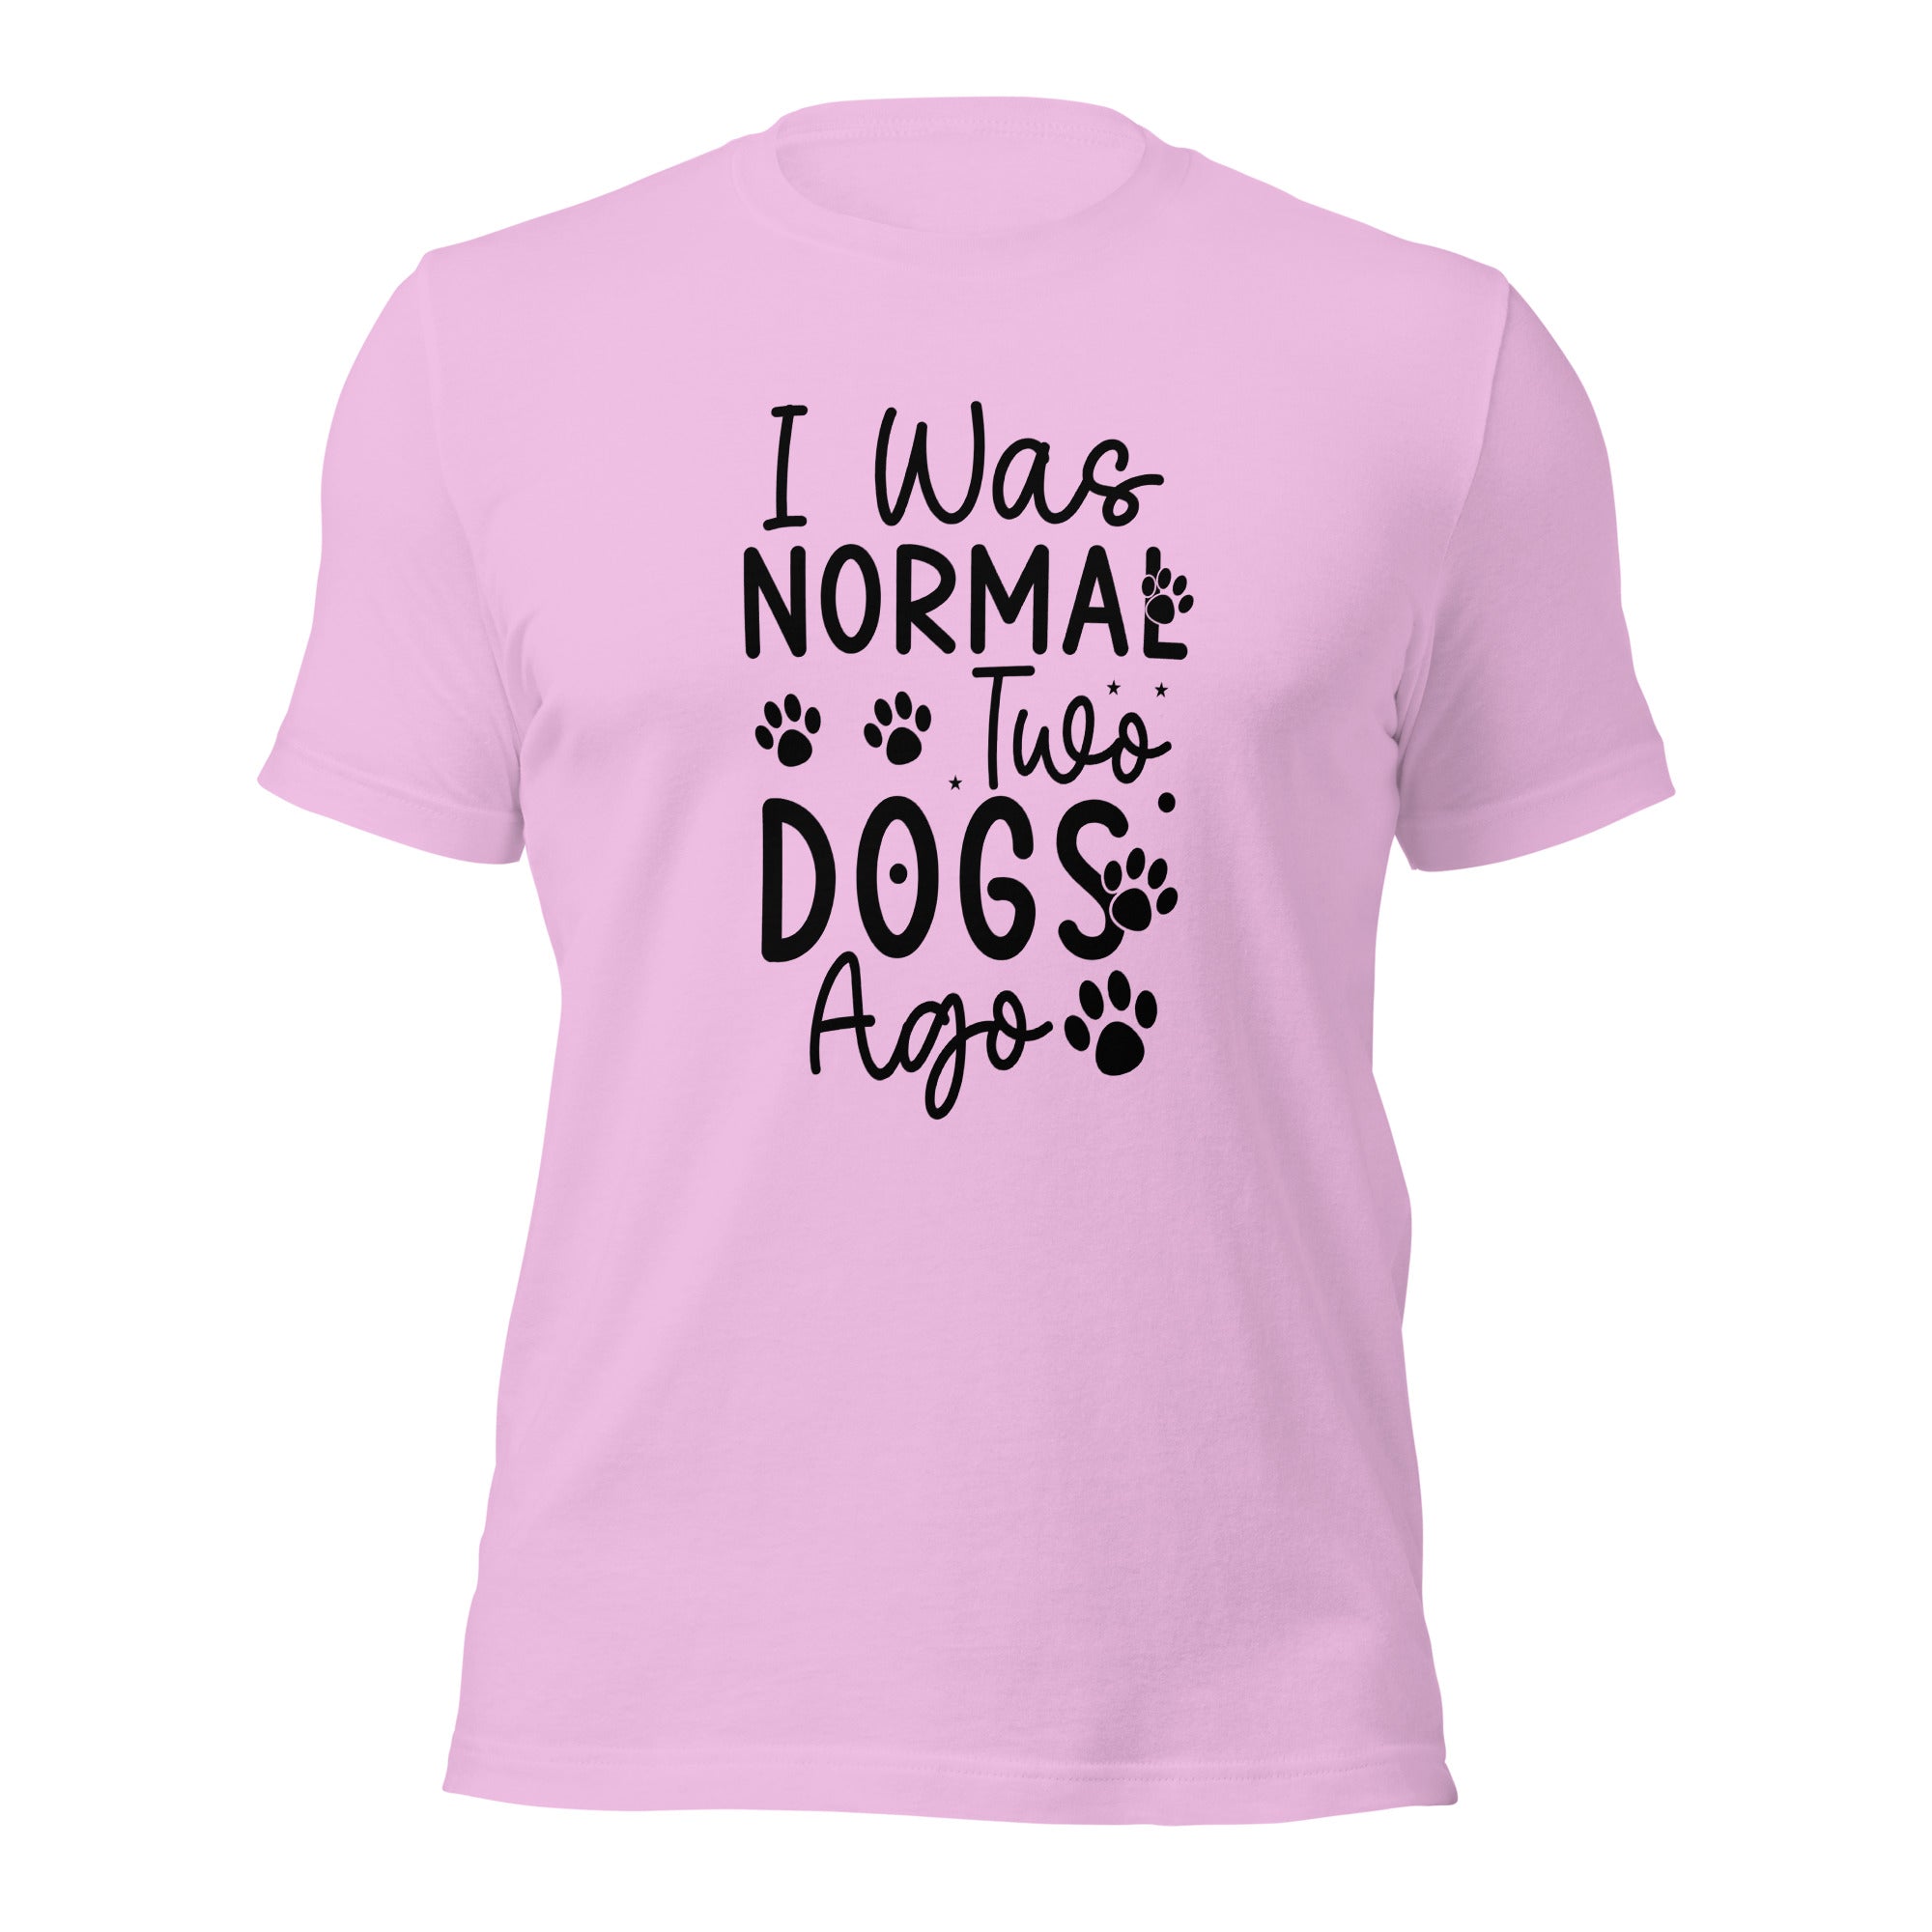 Unisex t-shirt- I Was Normal Two Dogs Ago